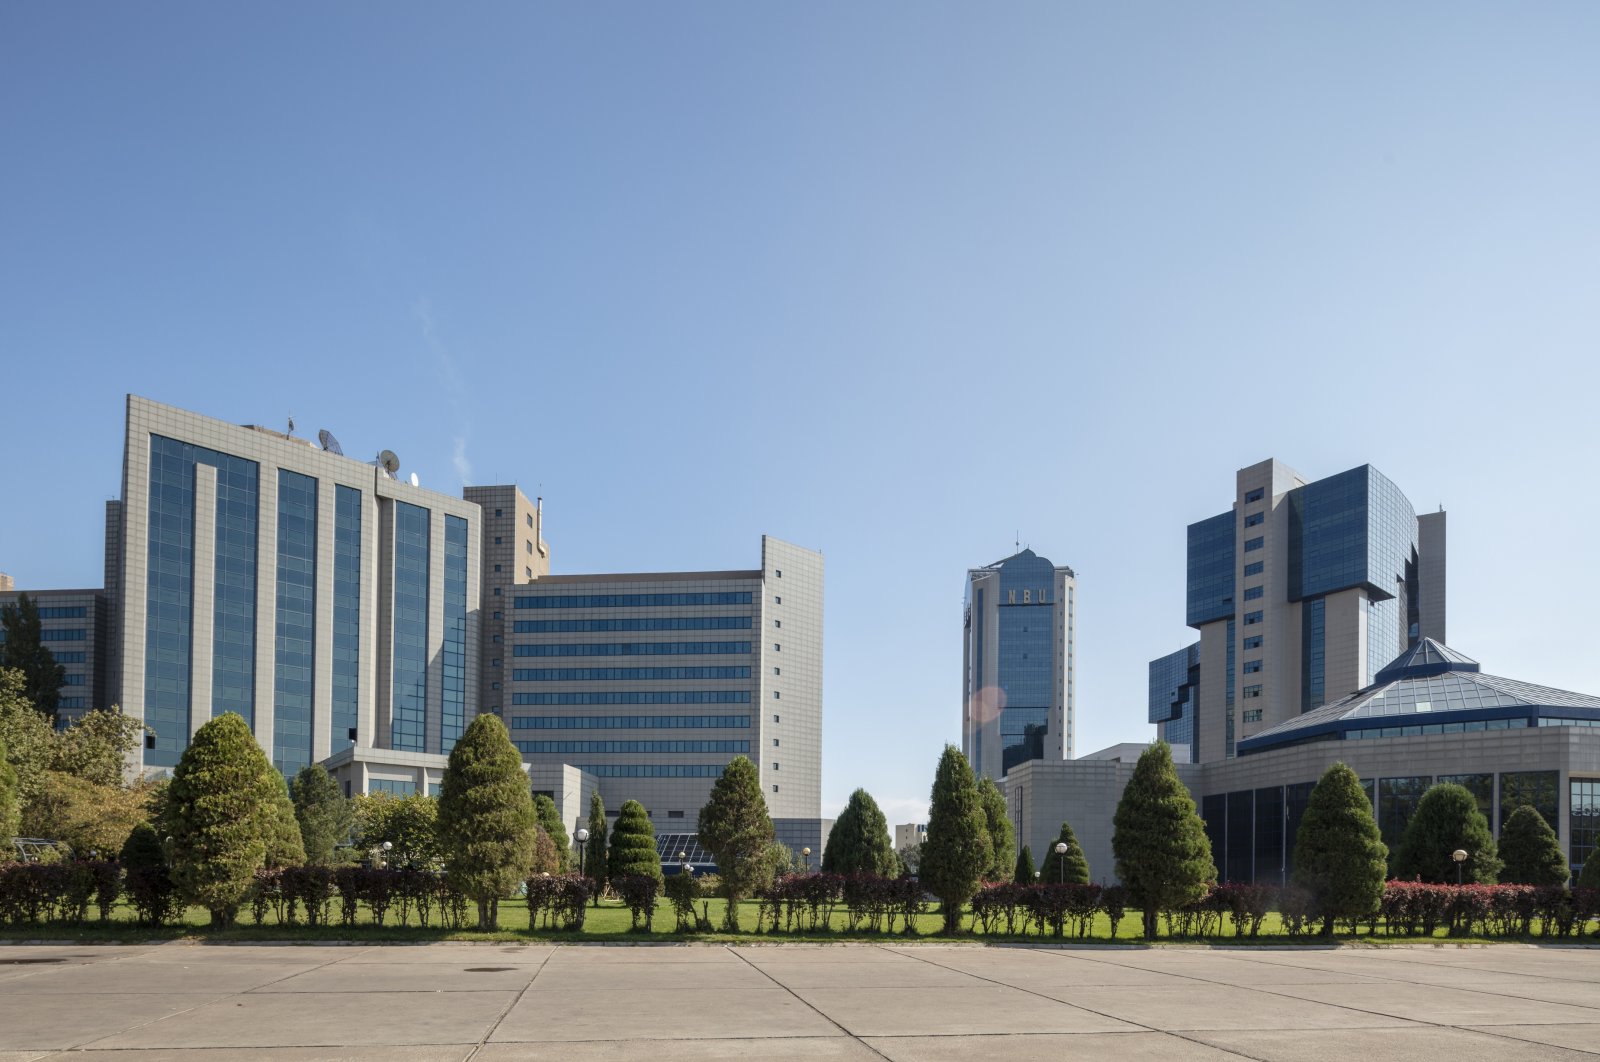 The International Business Center is seen in this undated photo, in Tashkent, Uzbekistan. (Getty Images Photo)